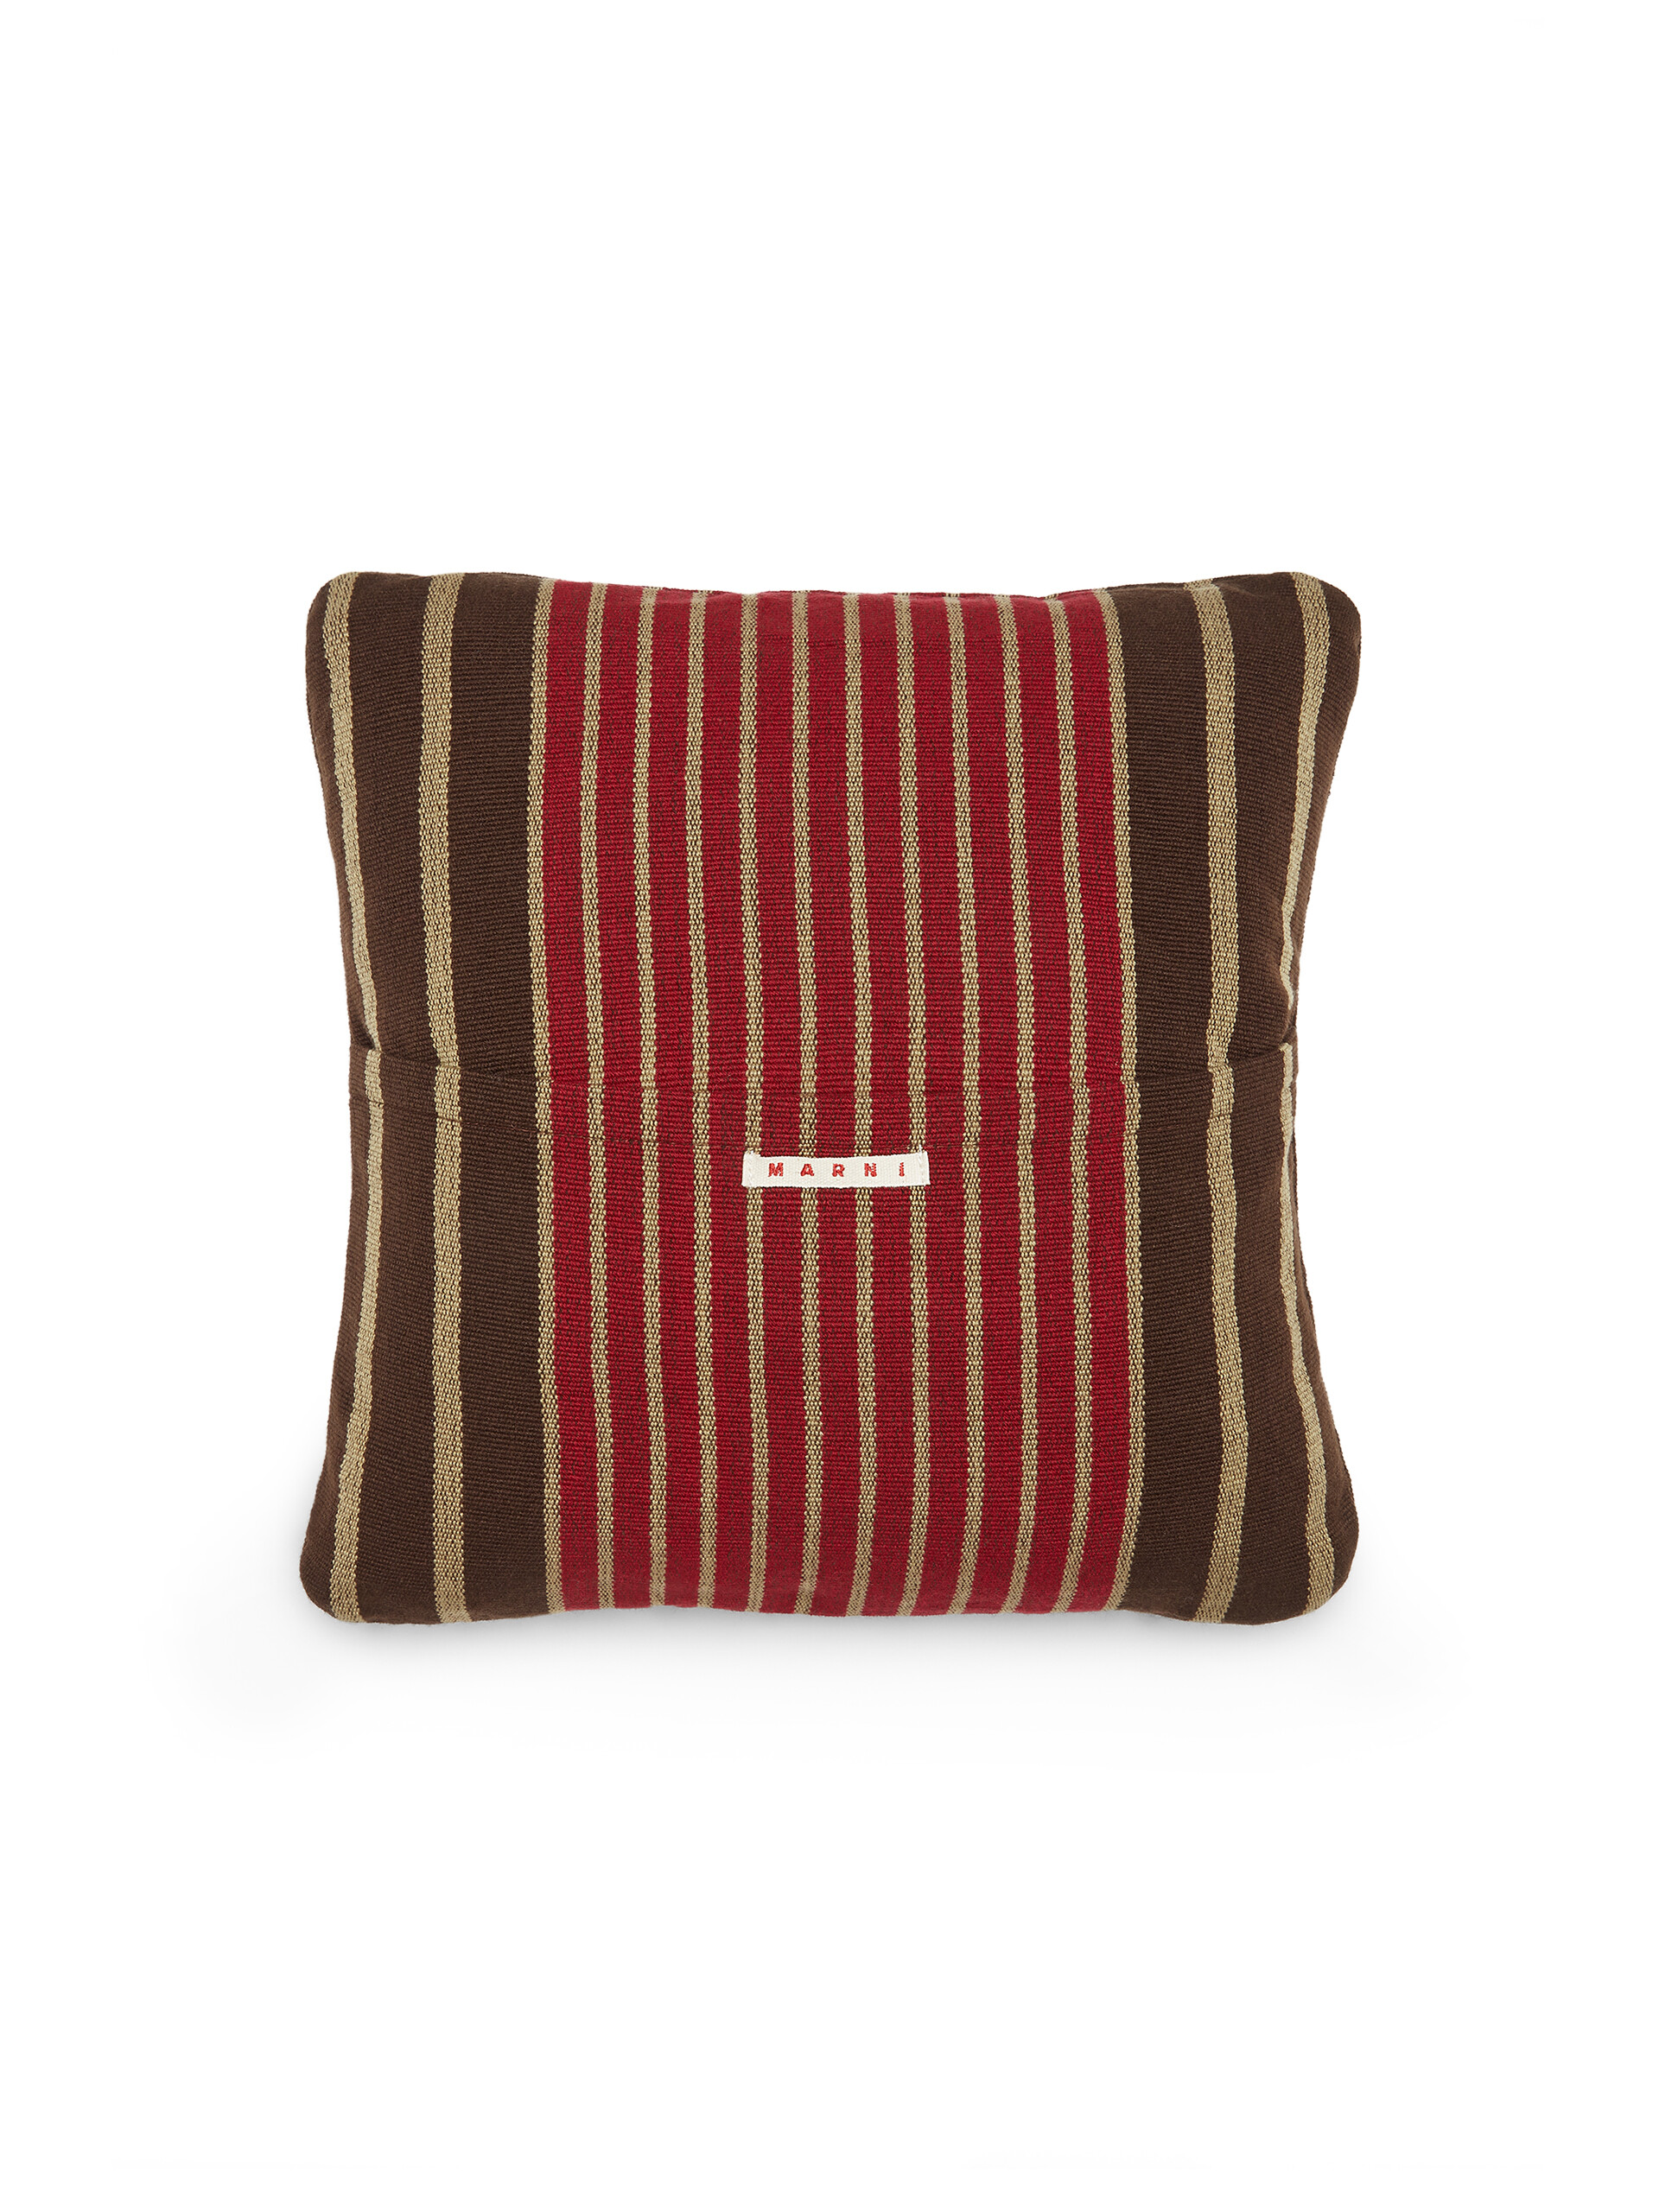 MARNI MARKET square pillow cover in polyester with red brown and beige vertical stripes - Furniture - Image 2